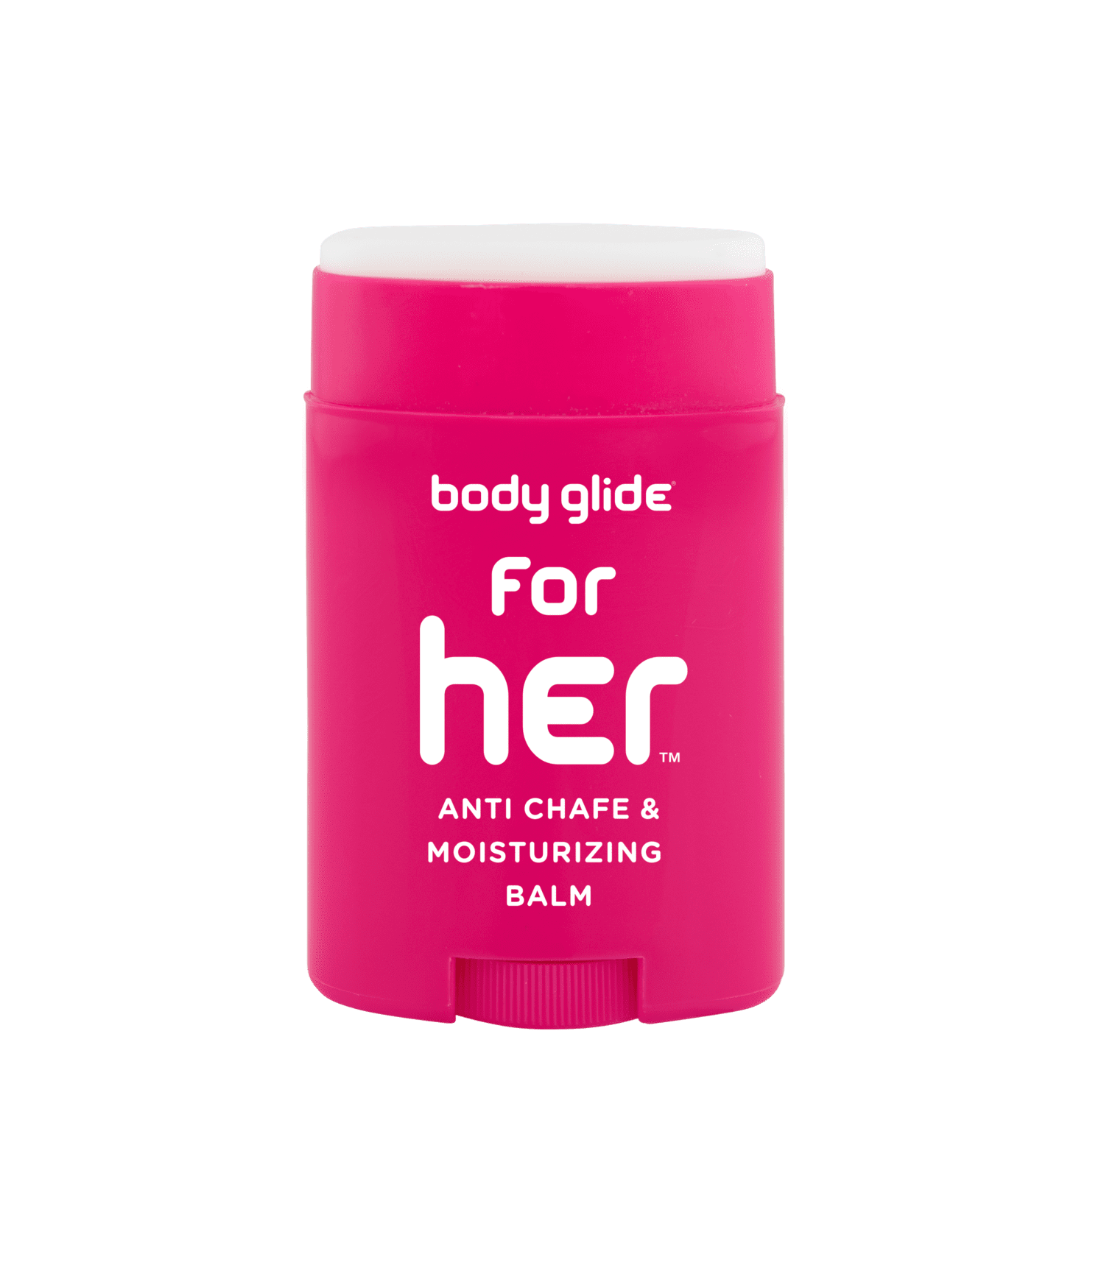 Body Glide® For Her Anti Chafe Balm for Dry, Sensitive Skin